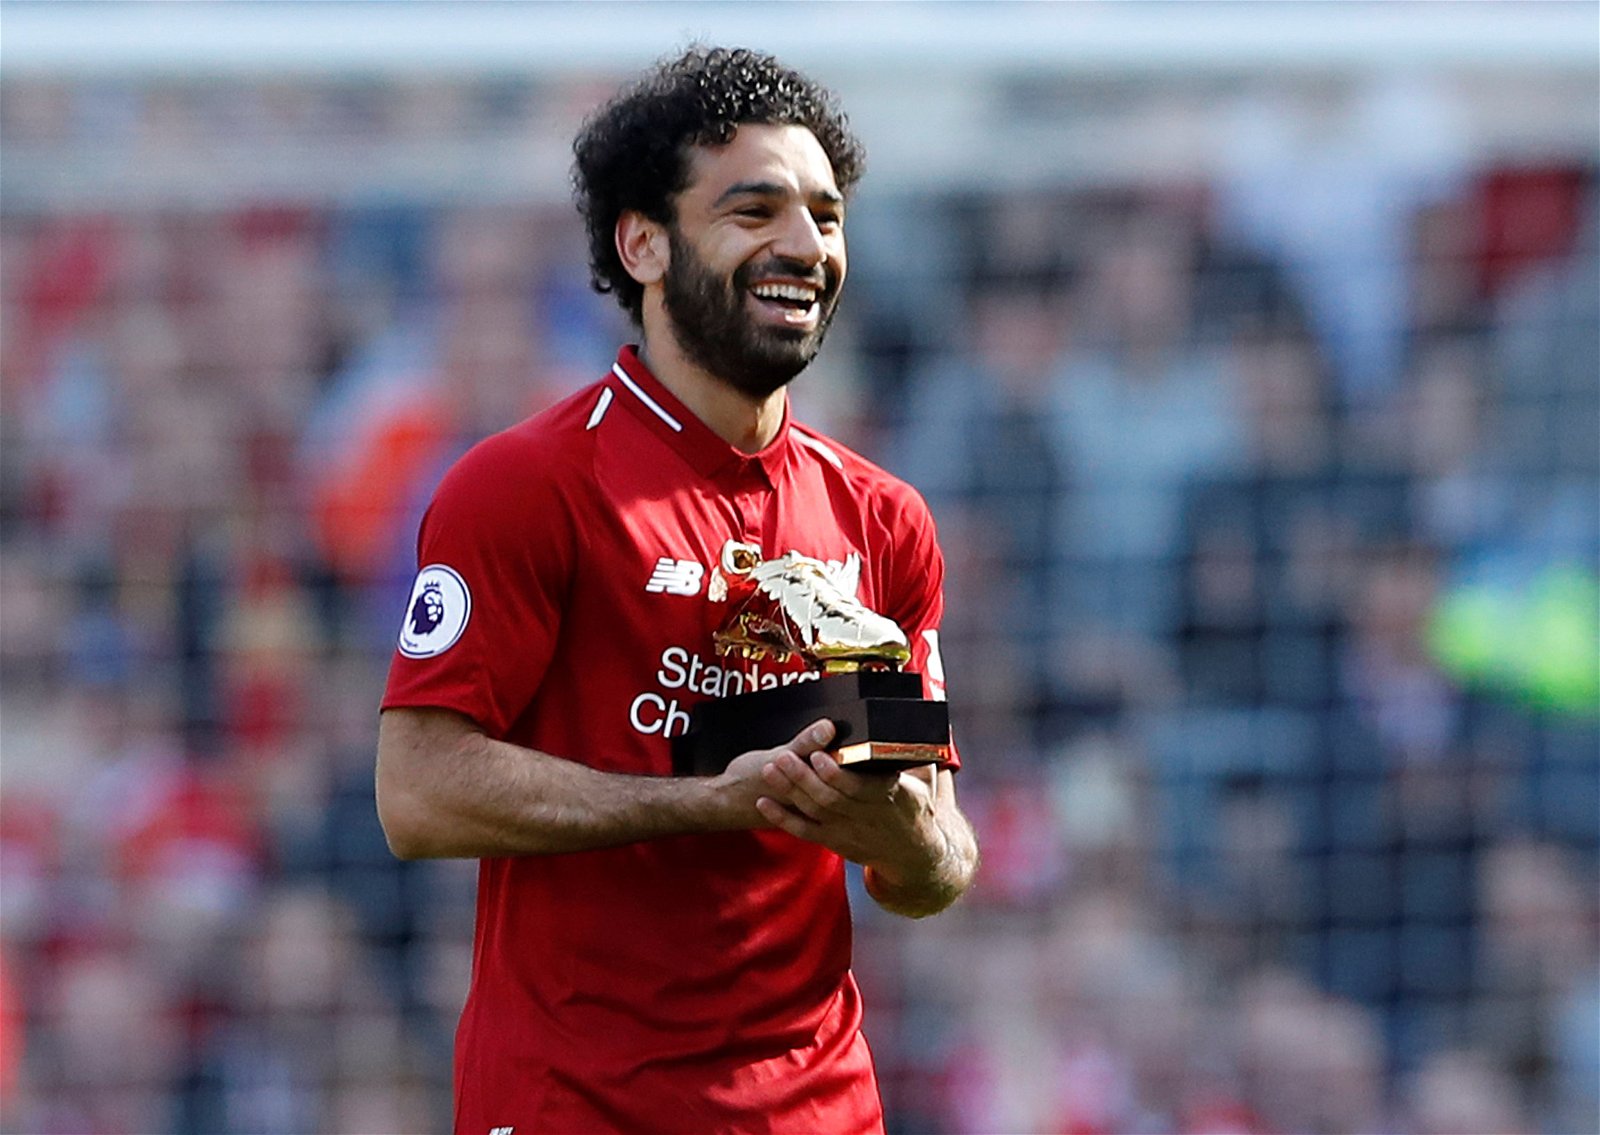 Mohamed Salah with his first golden boot in the 17/18 season